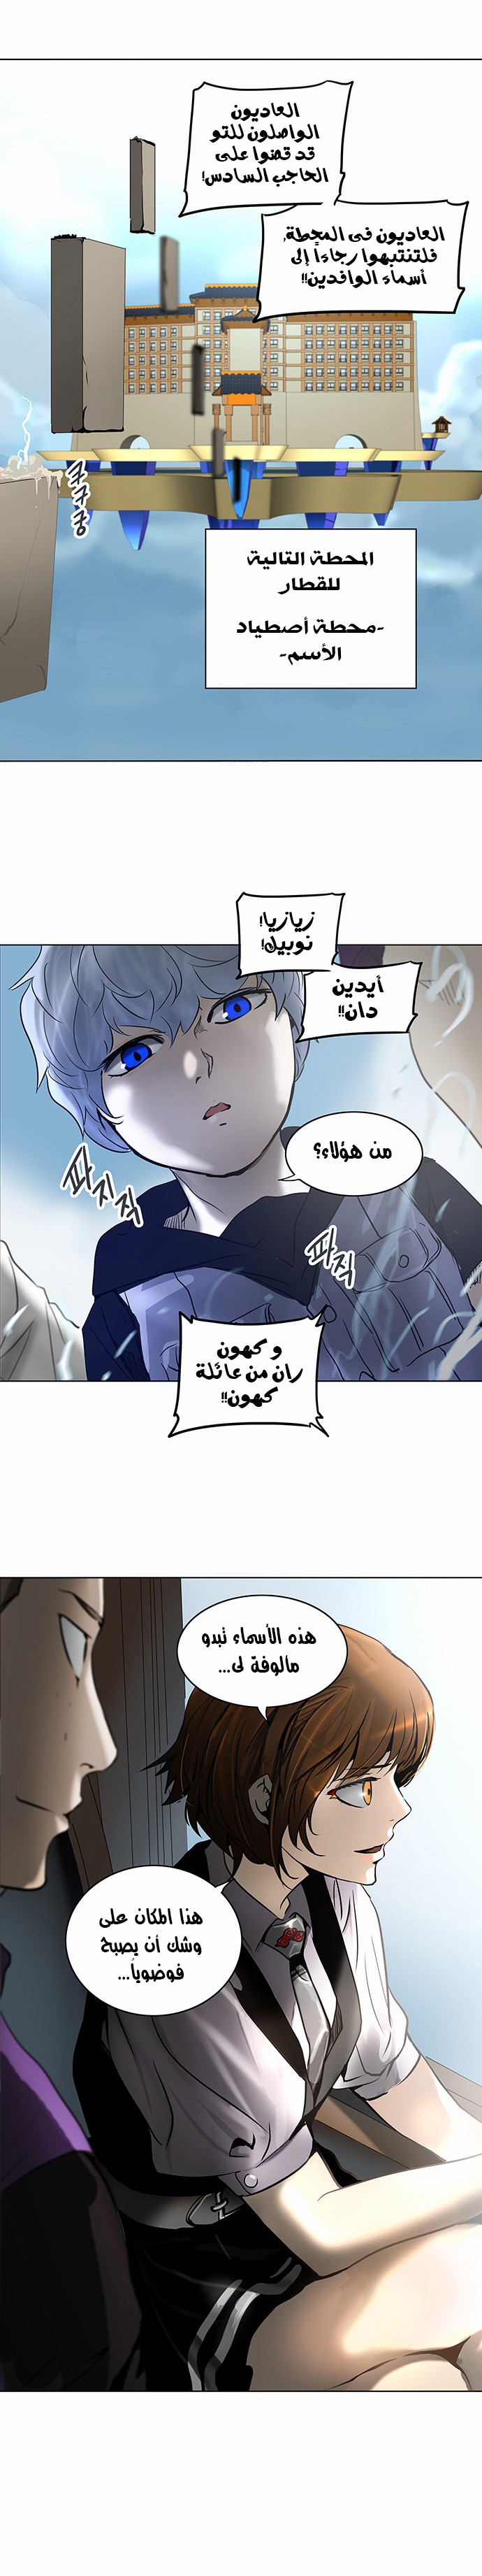 Tower of God 2: Chapter 198 - Page 1